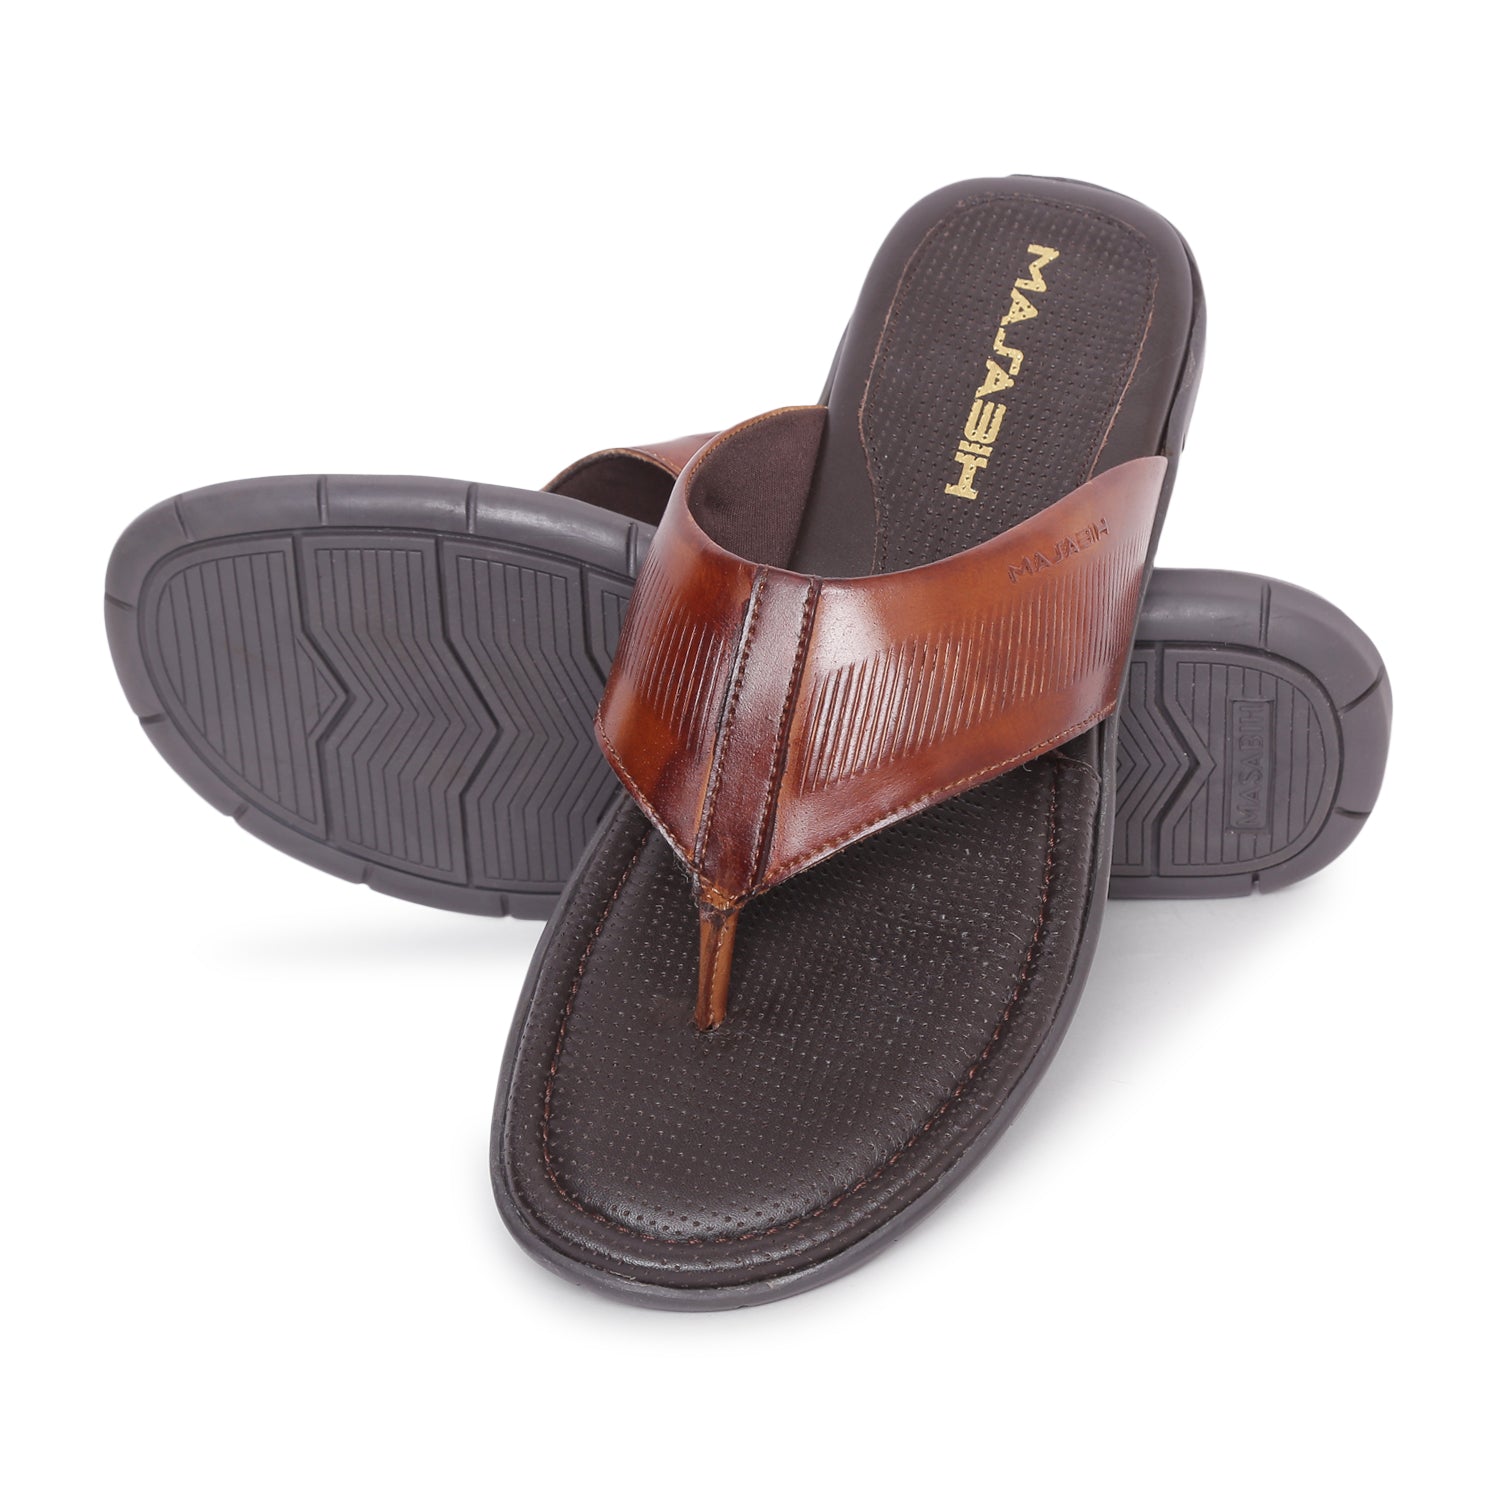 MASABIH Geniune Leather Soft small line Print Tan Color modern thong sandals for Mens